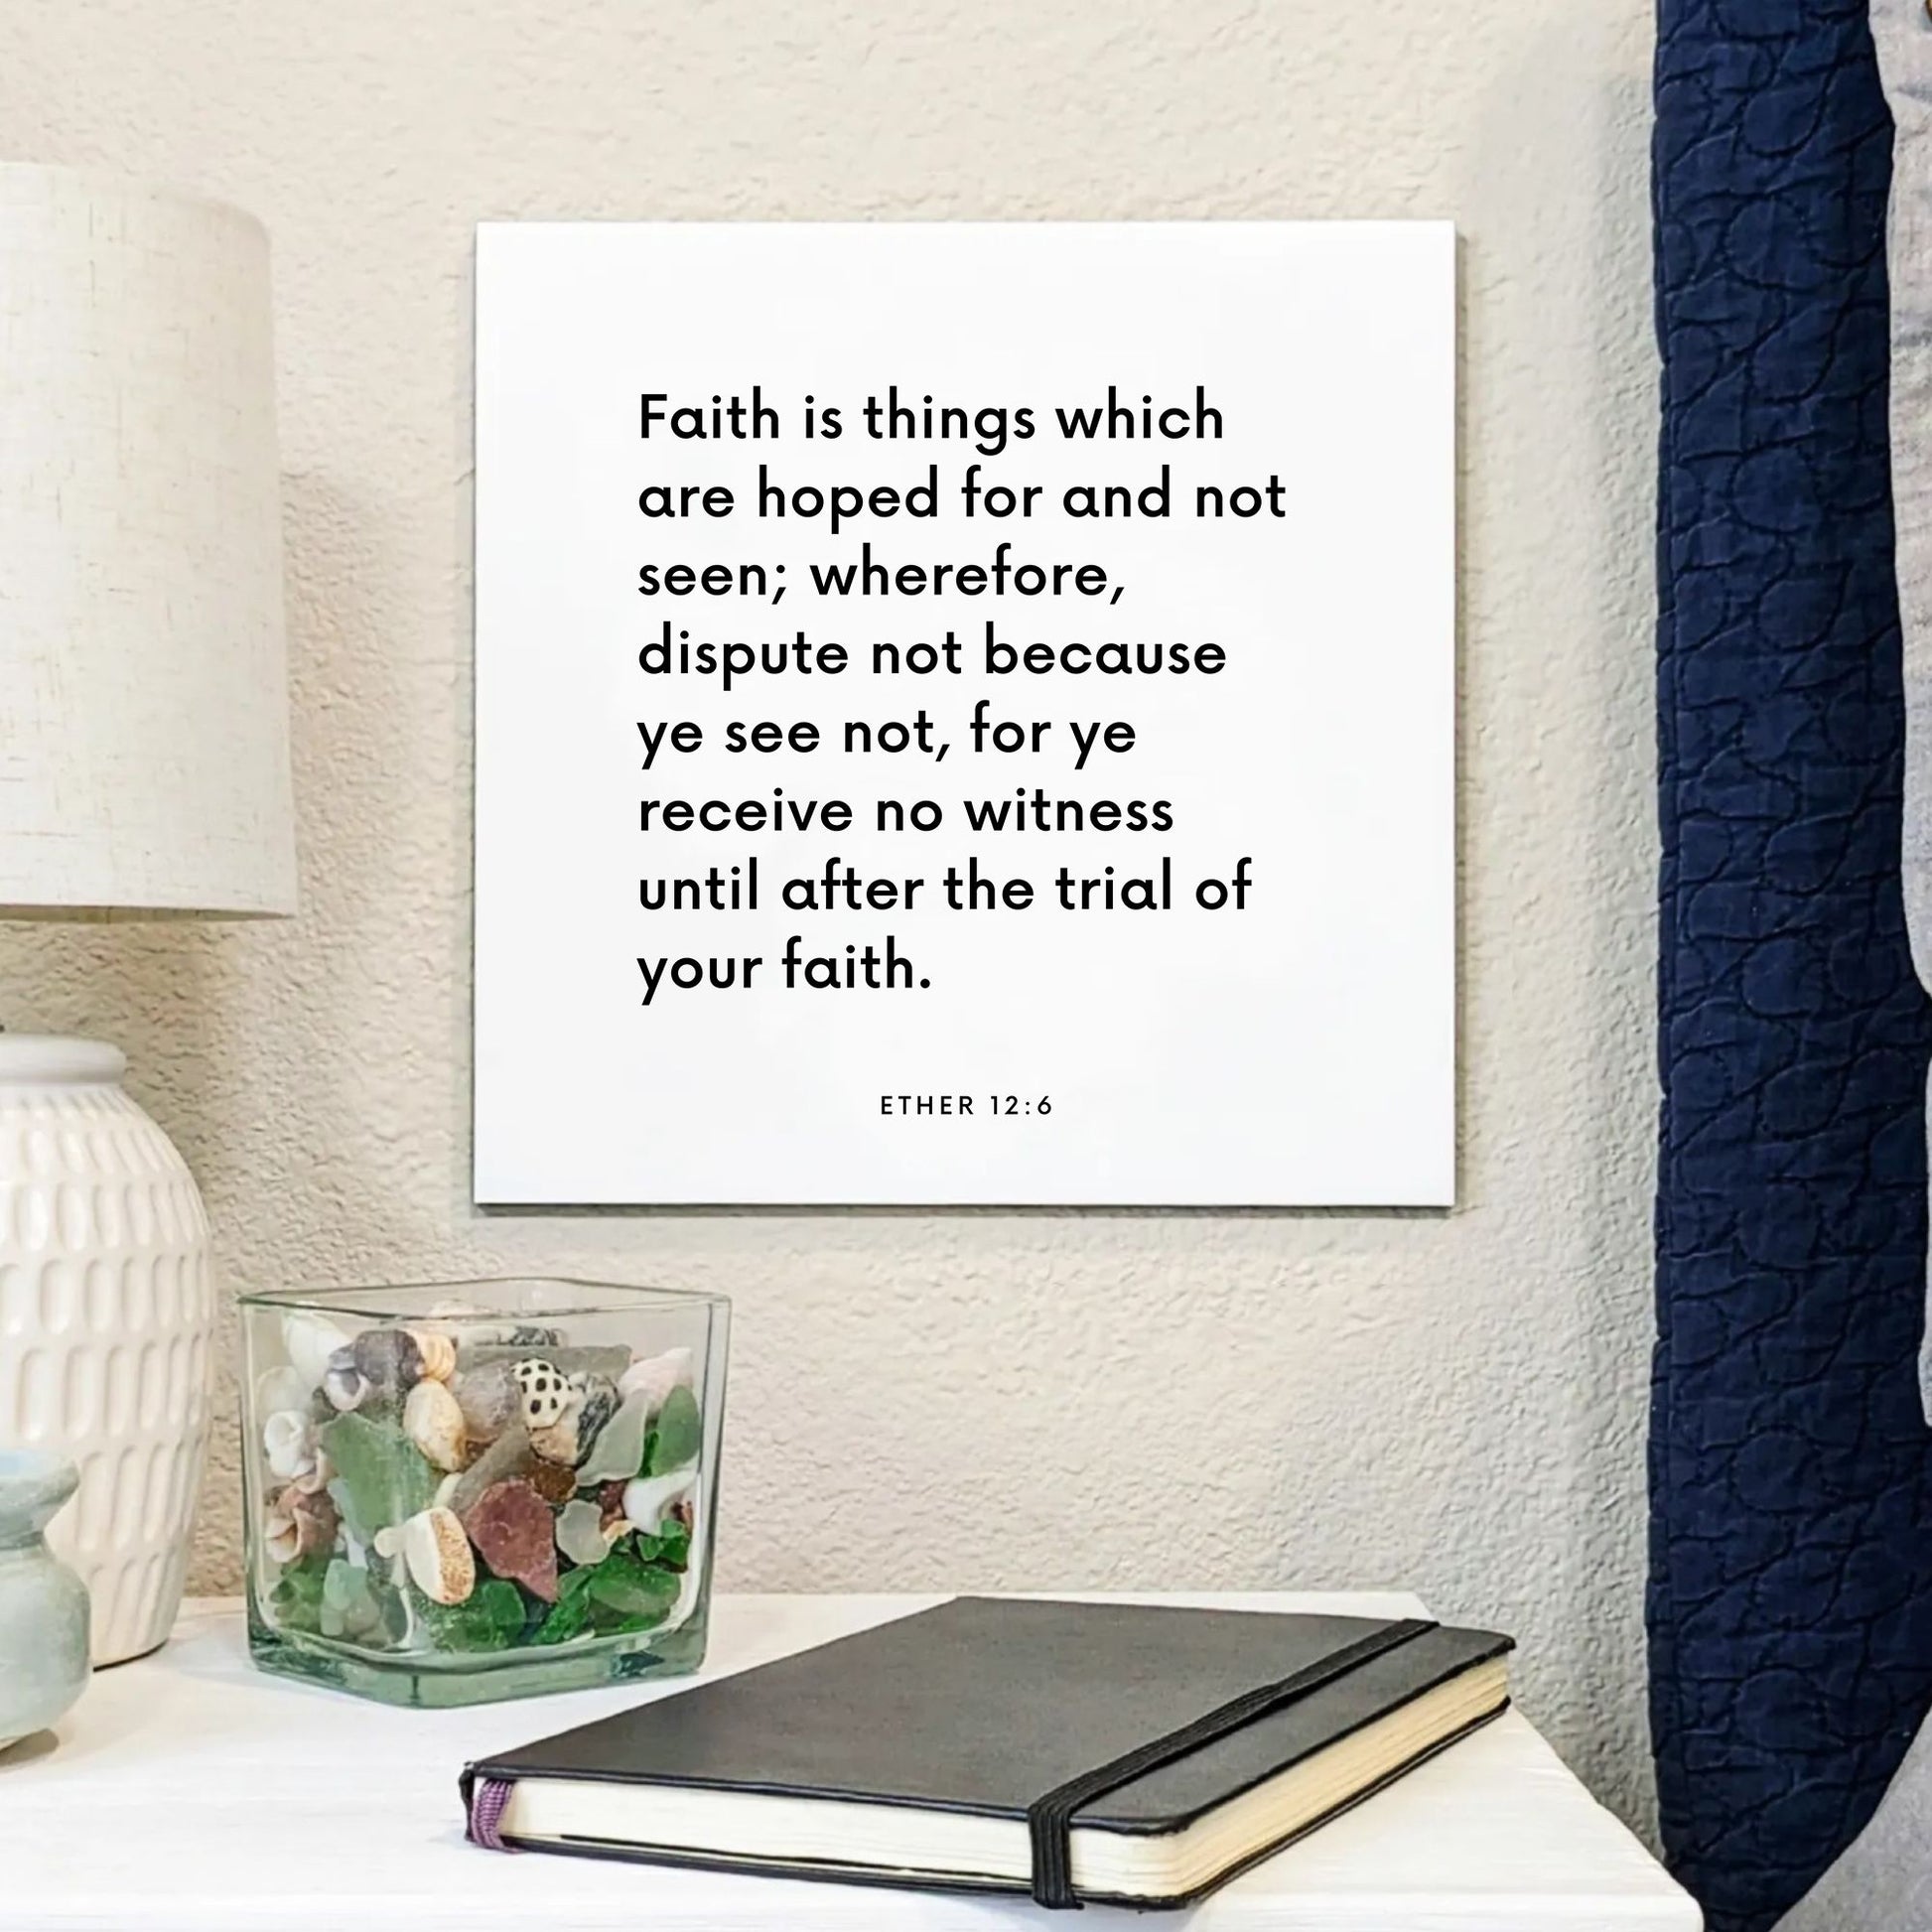 Bedside mouting of the scripture tile for Ether 12:6 - "Faith is things which are hoped for and not seen"